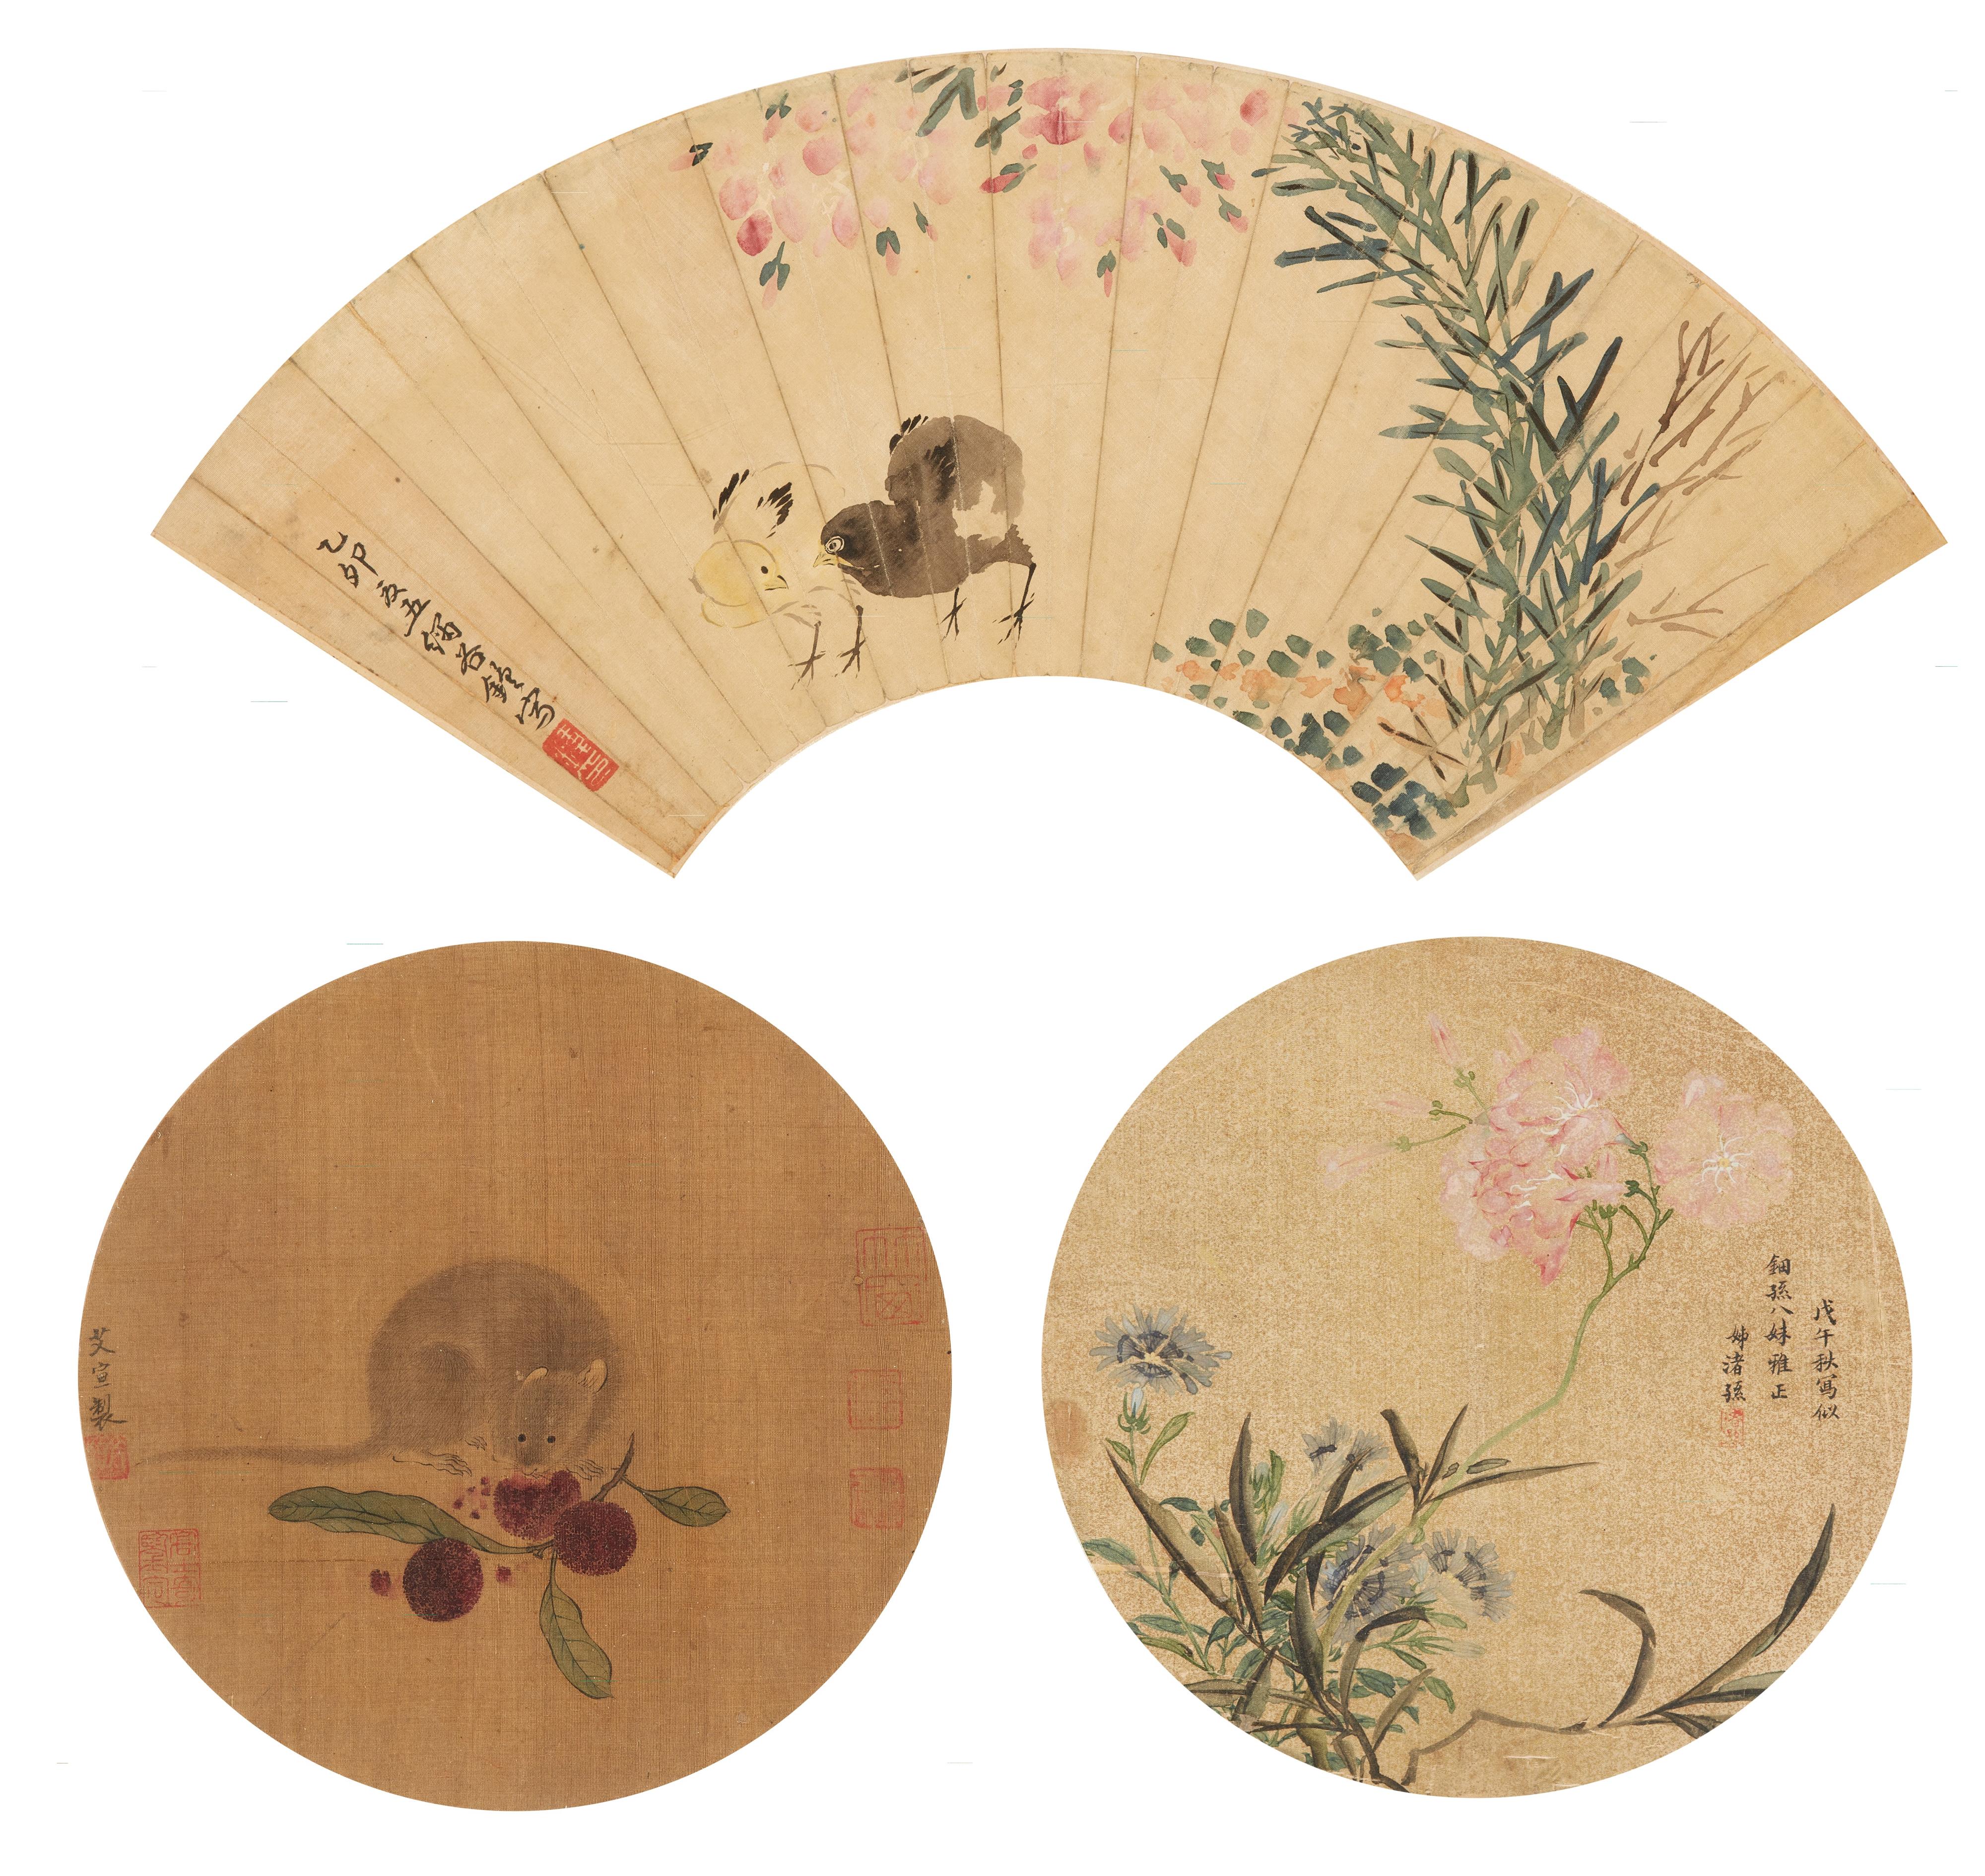 Sima Zhong, in the manner of
After Ai Xuan and Zhu Sun. Qing dynasty - Three paintings. a) Two quails. Ink and colour on silk. Inscription, dated cyclically yimao (1855), signed Xu Suzhong and sealed Zhong yin. b) A mouse with a fruit. Ink and colo... - image-1